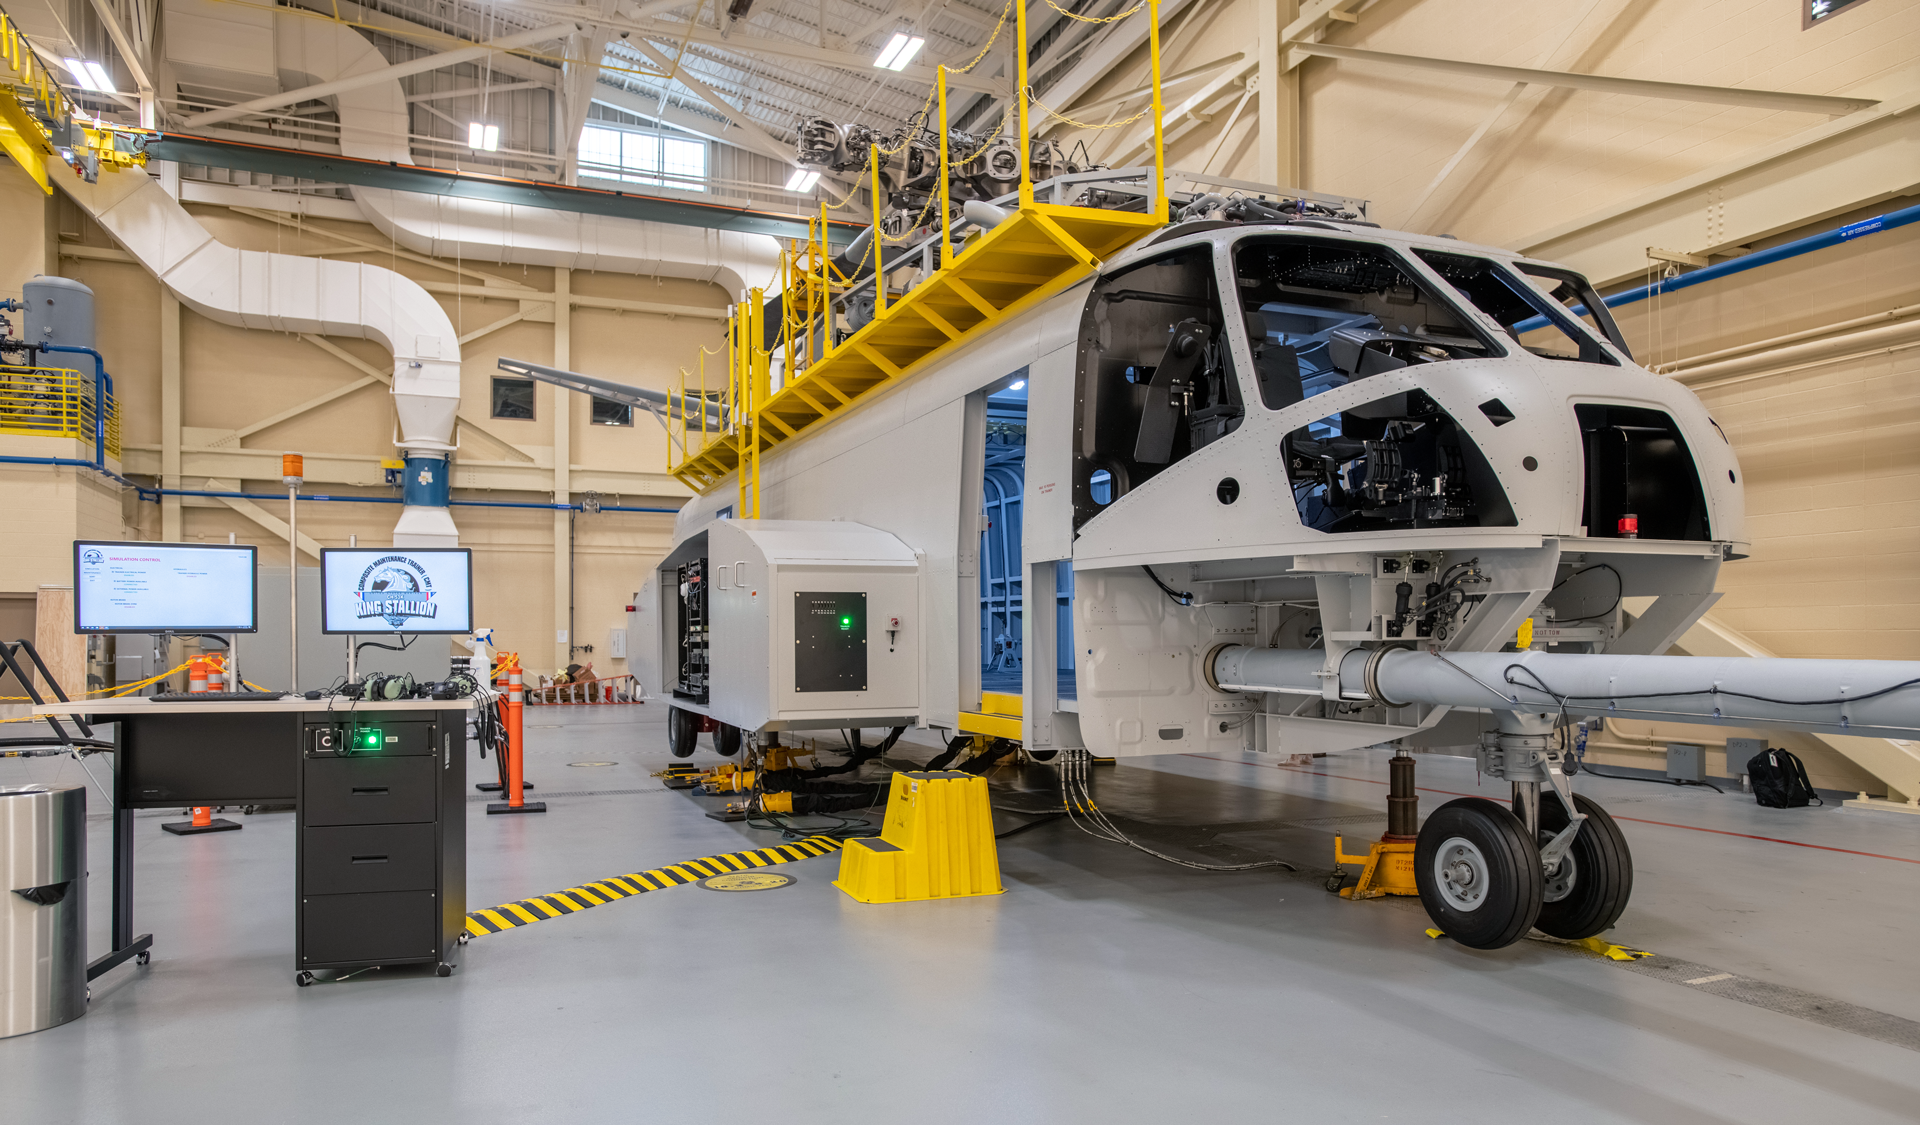 The Composite Maintenance Trainer (CMT) is a full-scale mock-up of the aircraft, allowing students to interact with the physical controls.